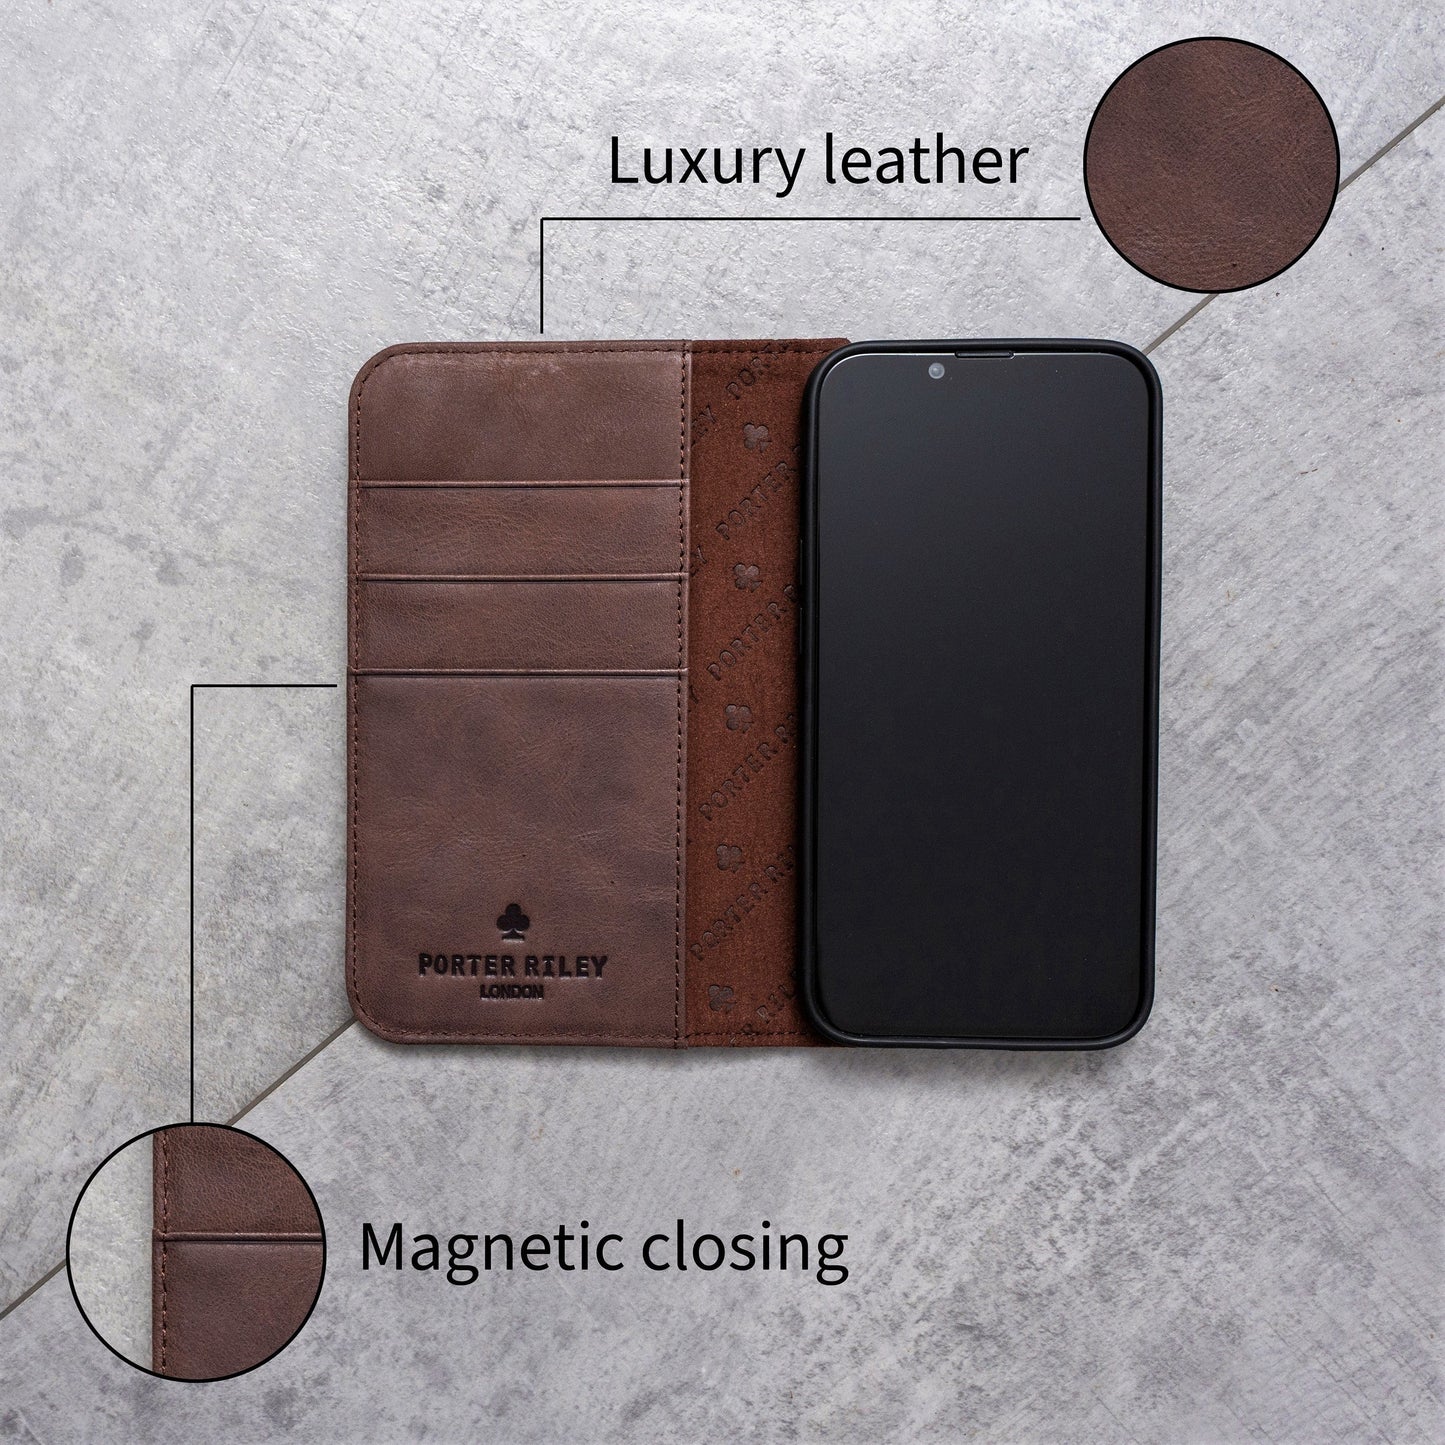 Samsung Galaxy S21 Leather Case. Premium Slim Genuine Leather Stand Case/Cover/Wallet (Chocolate Brown)